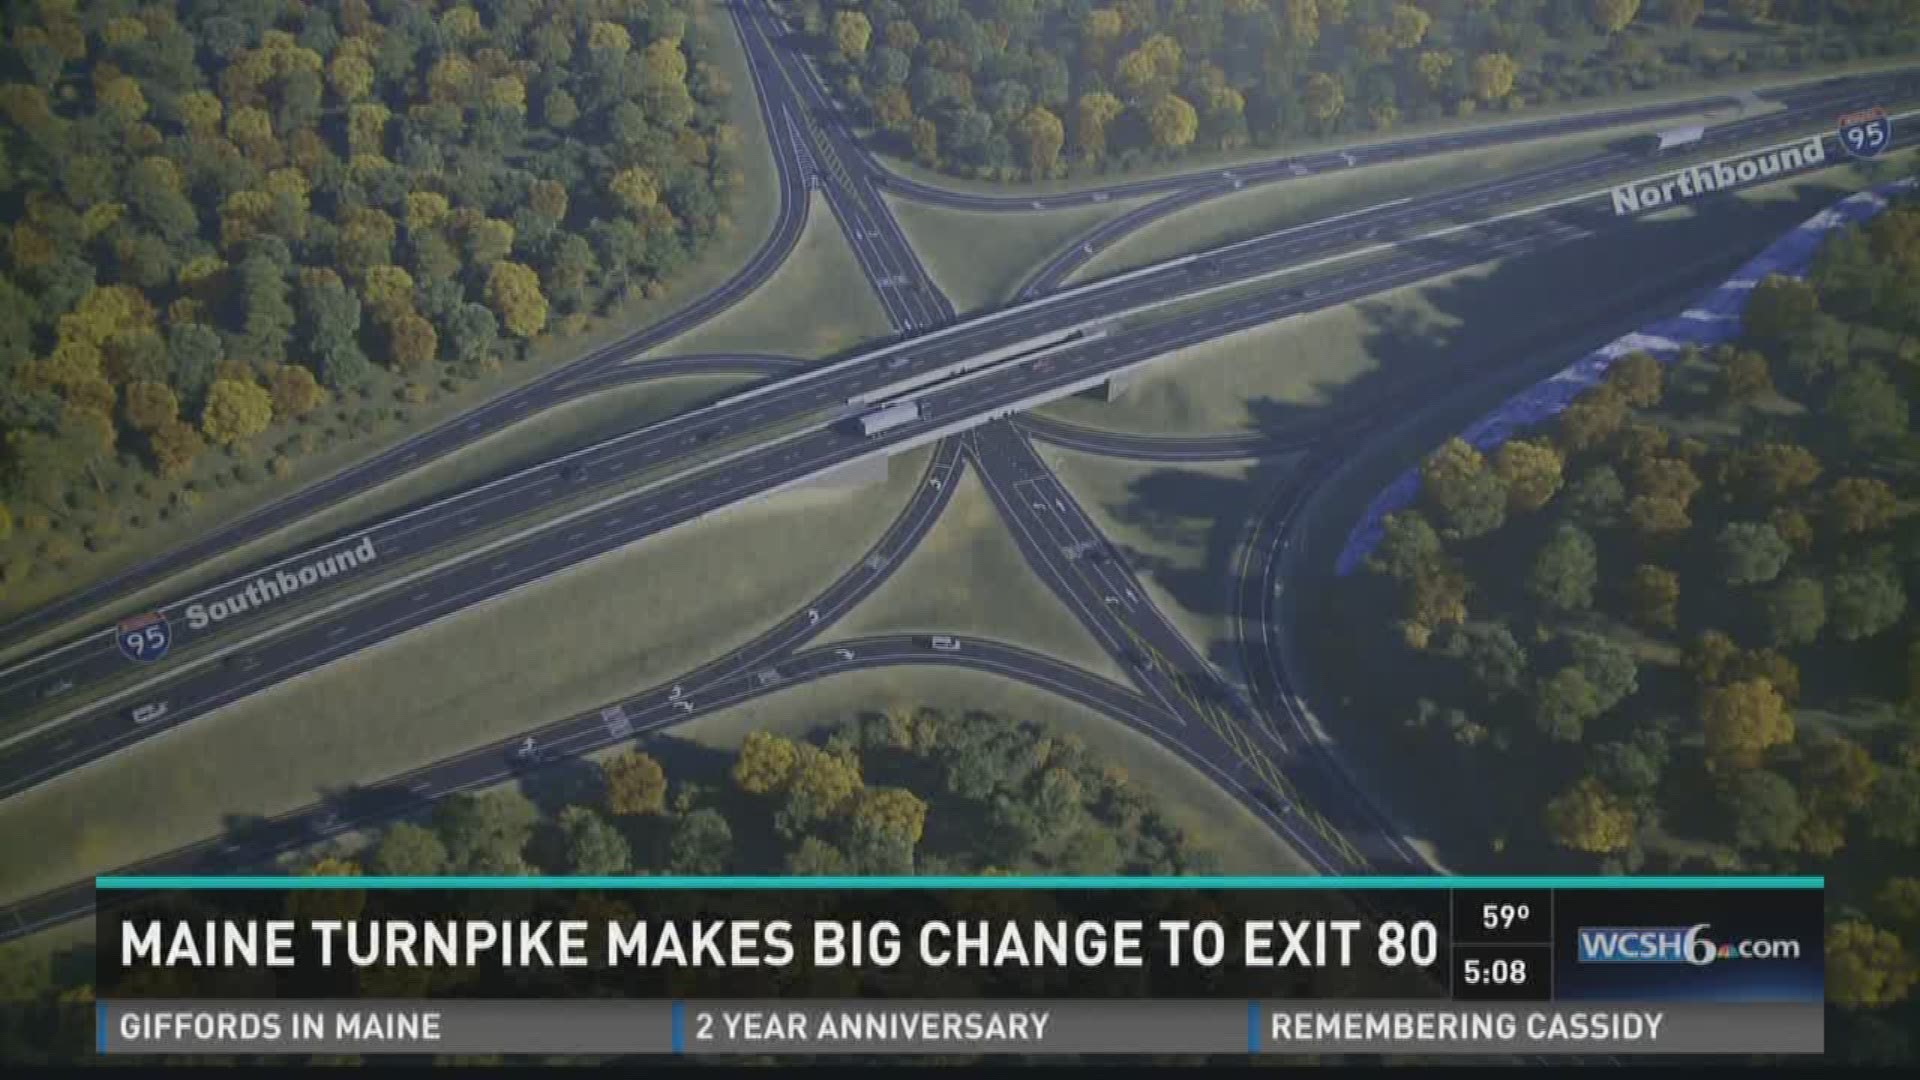 Maine Turnpike makes big change to exit 80